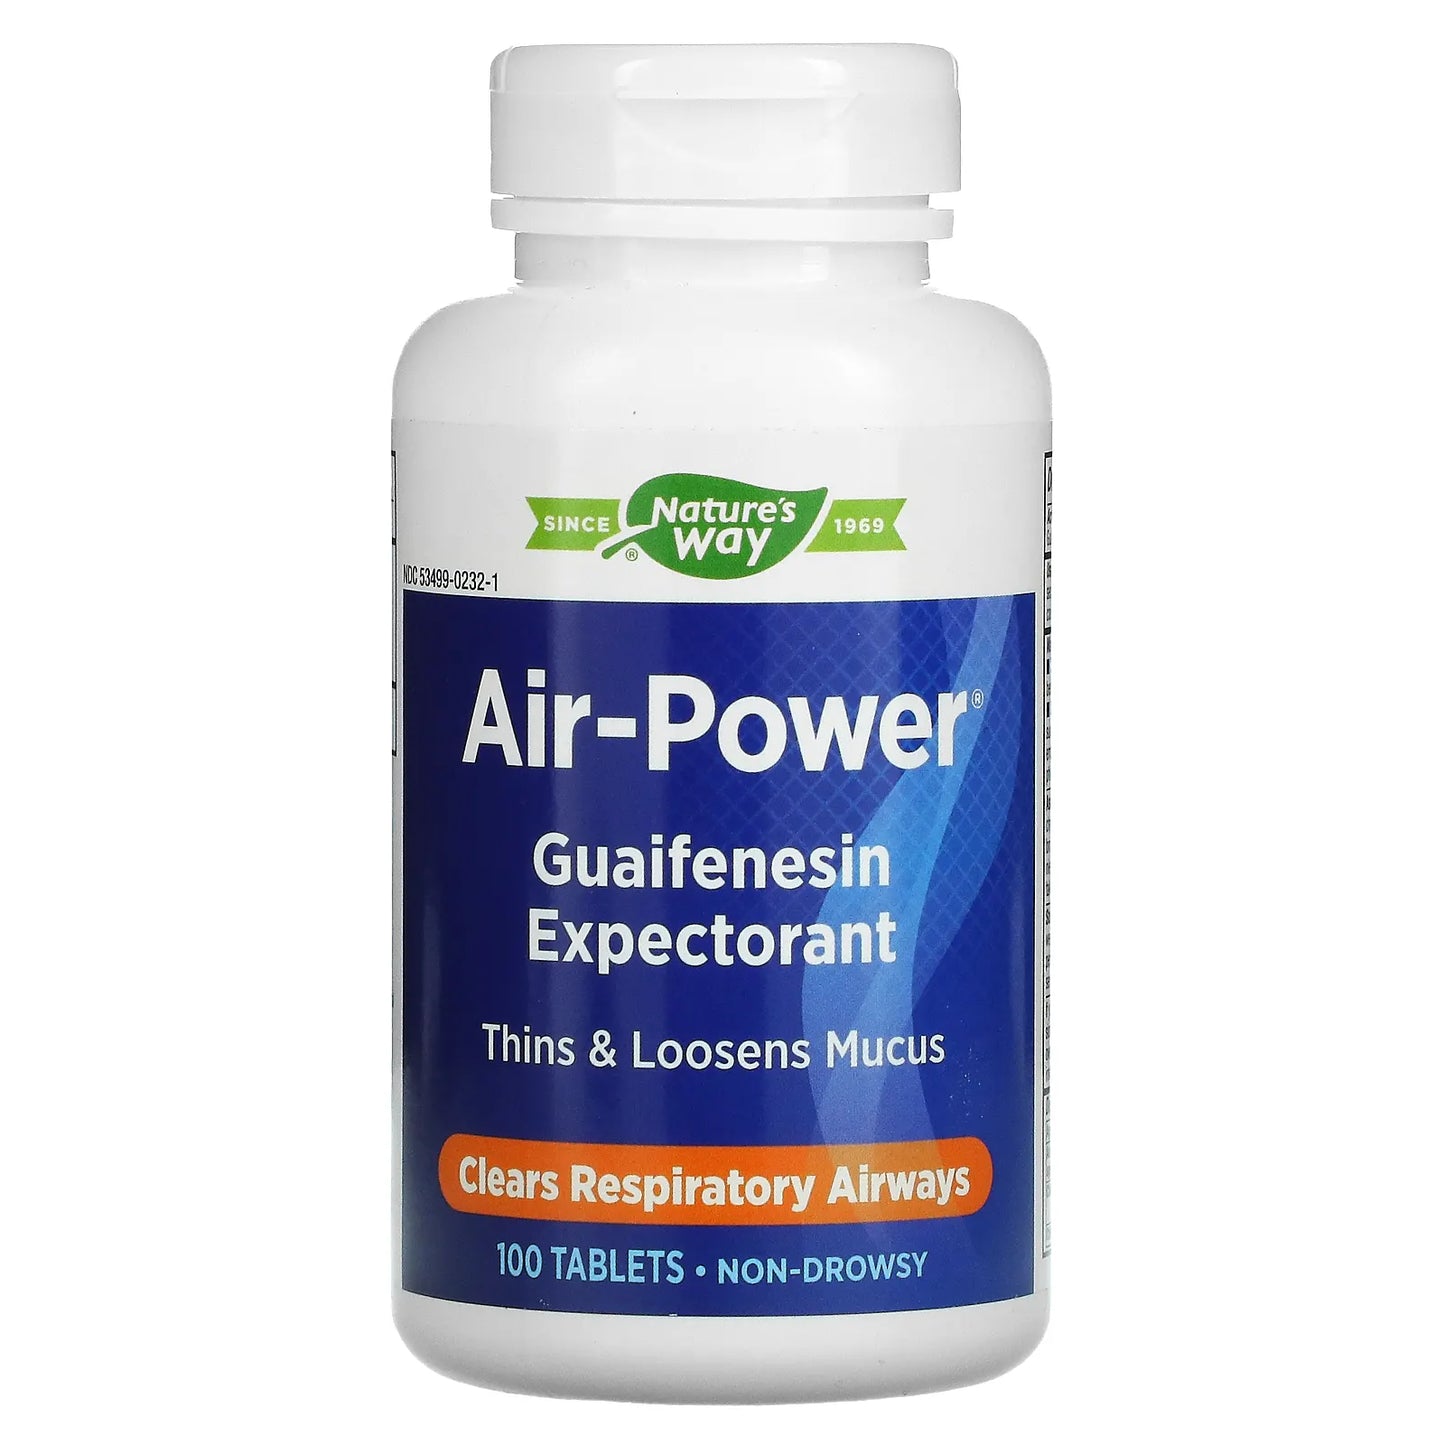 NATURE’S WAY AIR-POWER GUAIFENESIN EXPECTORANT, 100 TABLETS